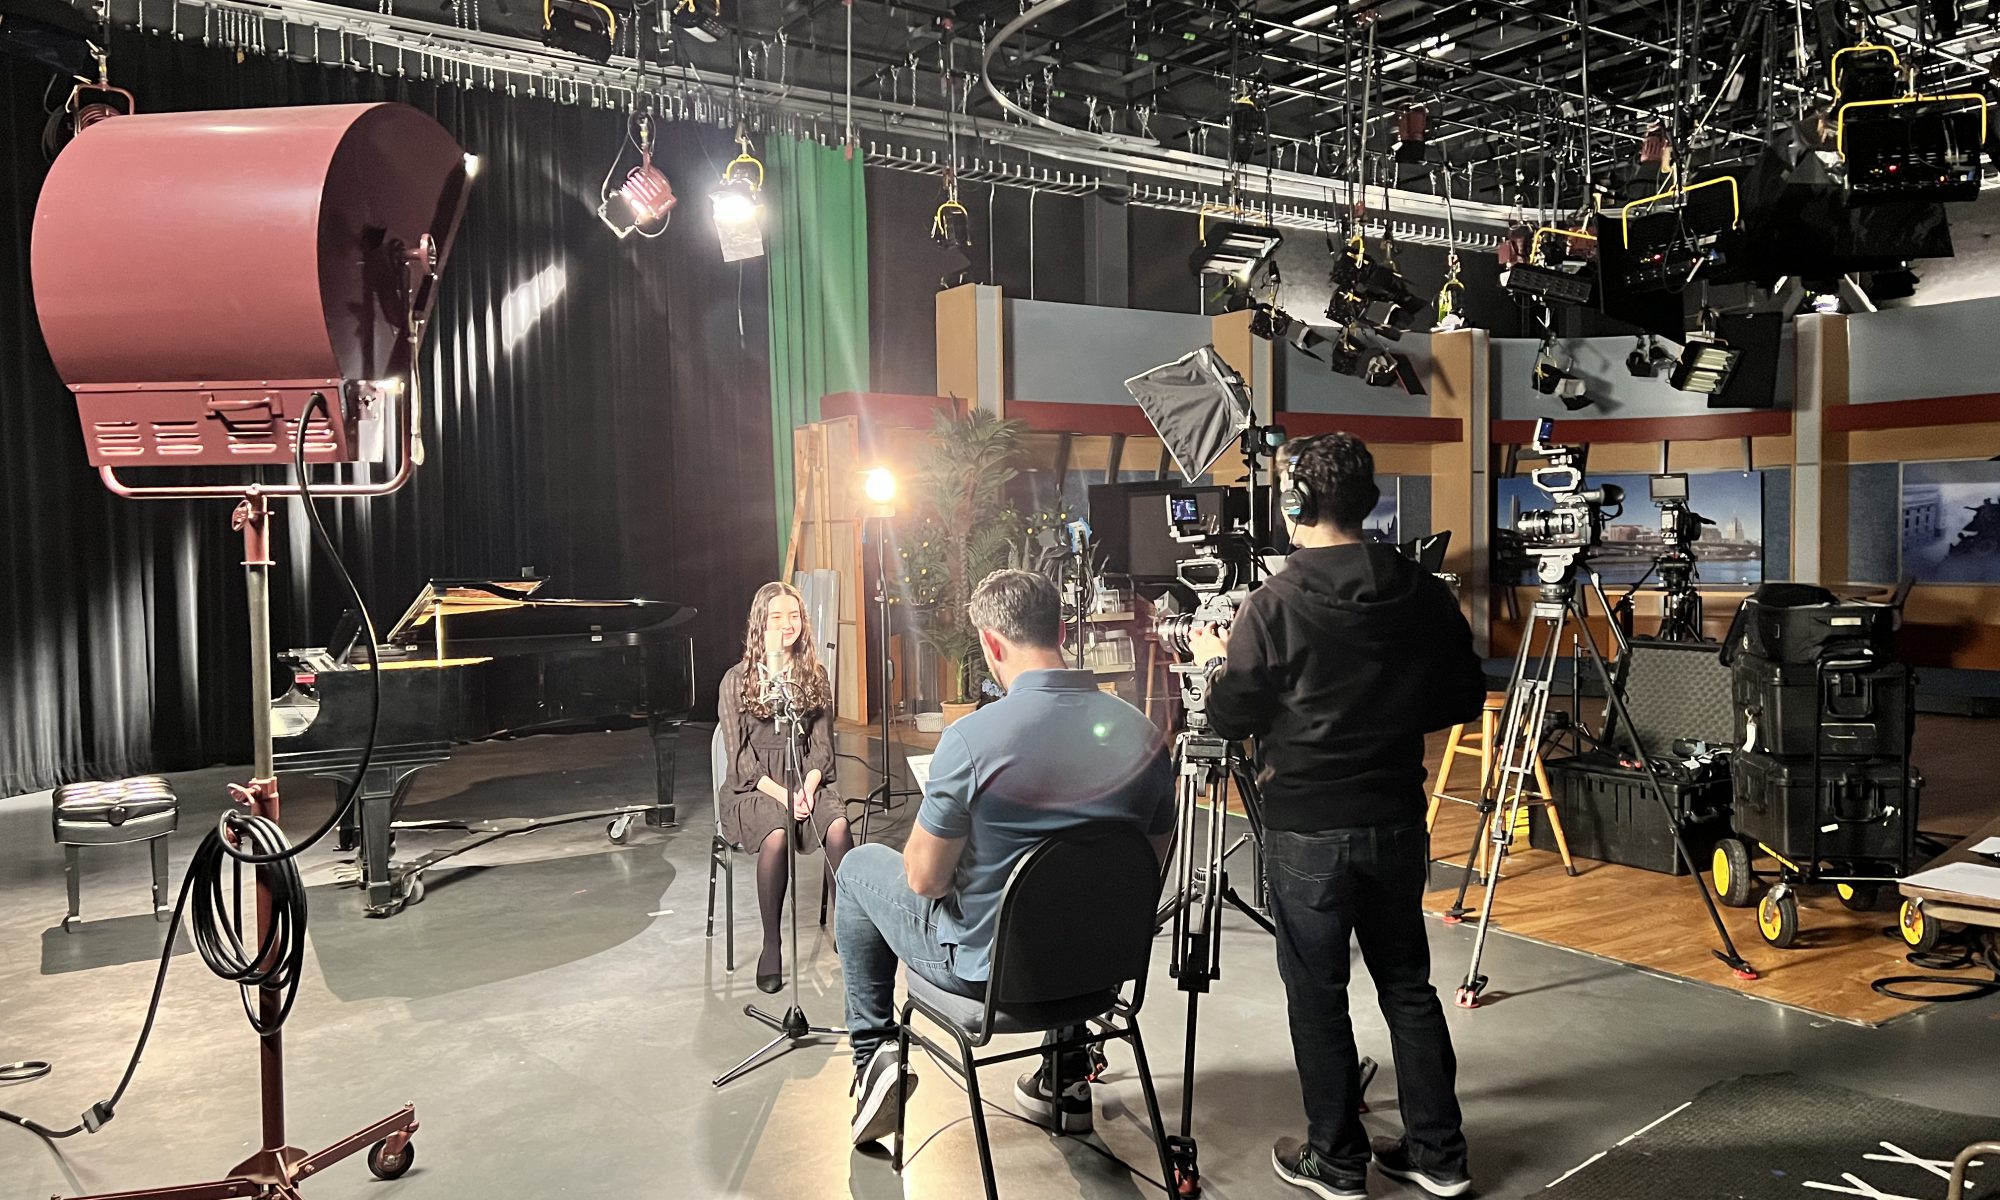 Student being interviewed in a TV studio